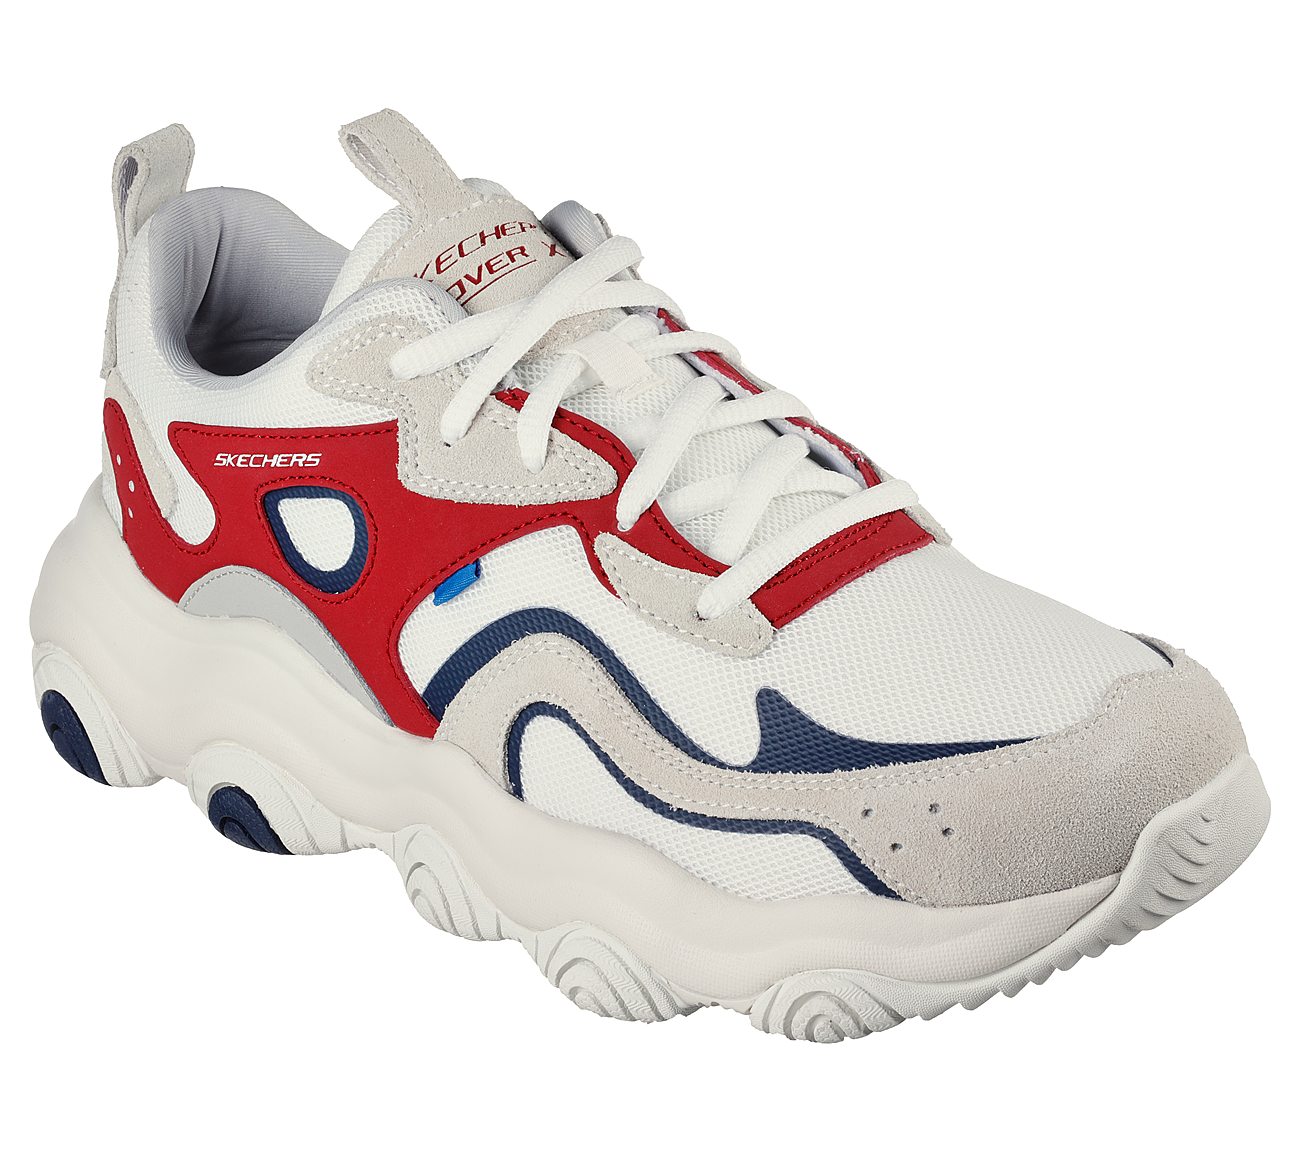 ROVER X-PROXIMITY, WHITE/NAVY/RED Footwear Lateral View